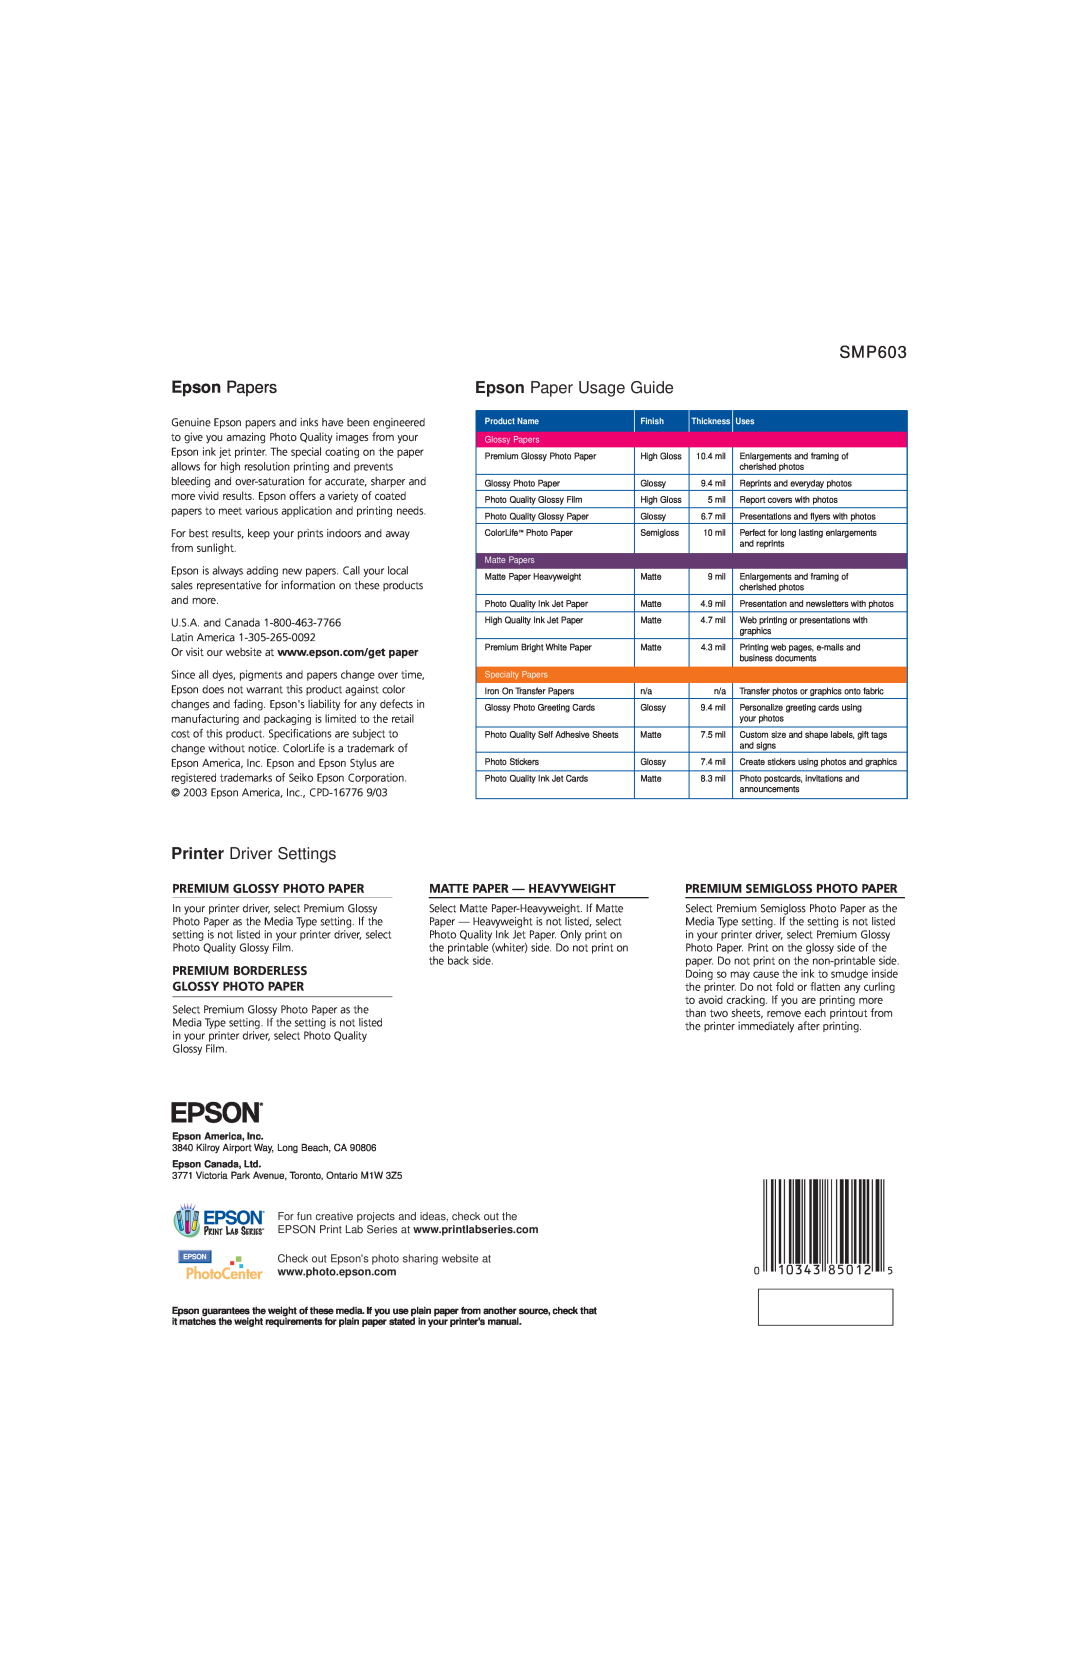 Epson manual SMP603 Epson Paper Usage Guide, Printer Driver Settings, Epson Papers, Premium Glossy Photo Paper 